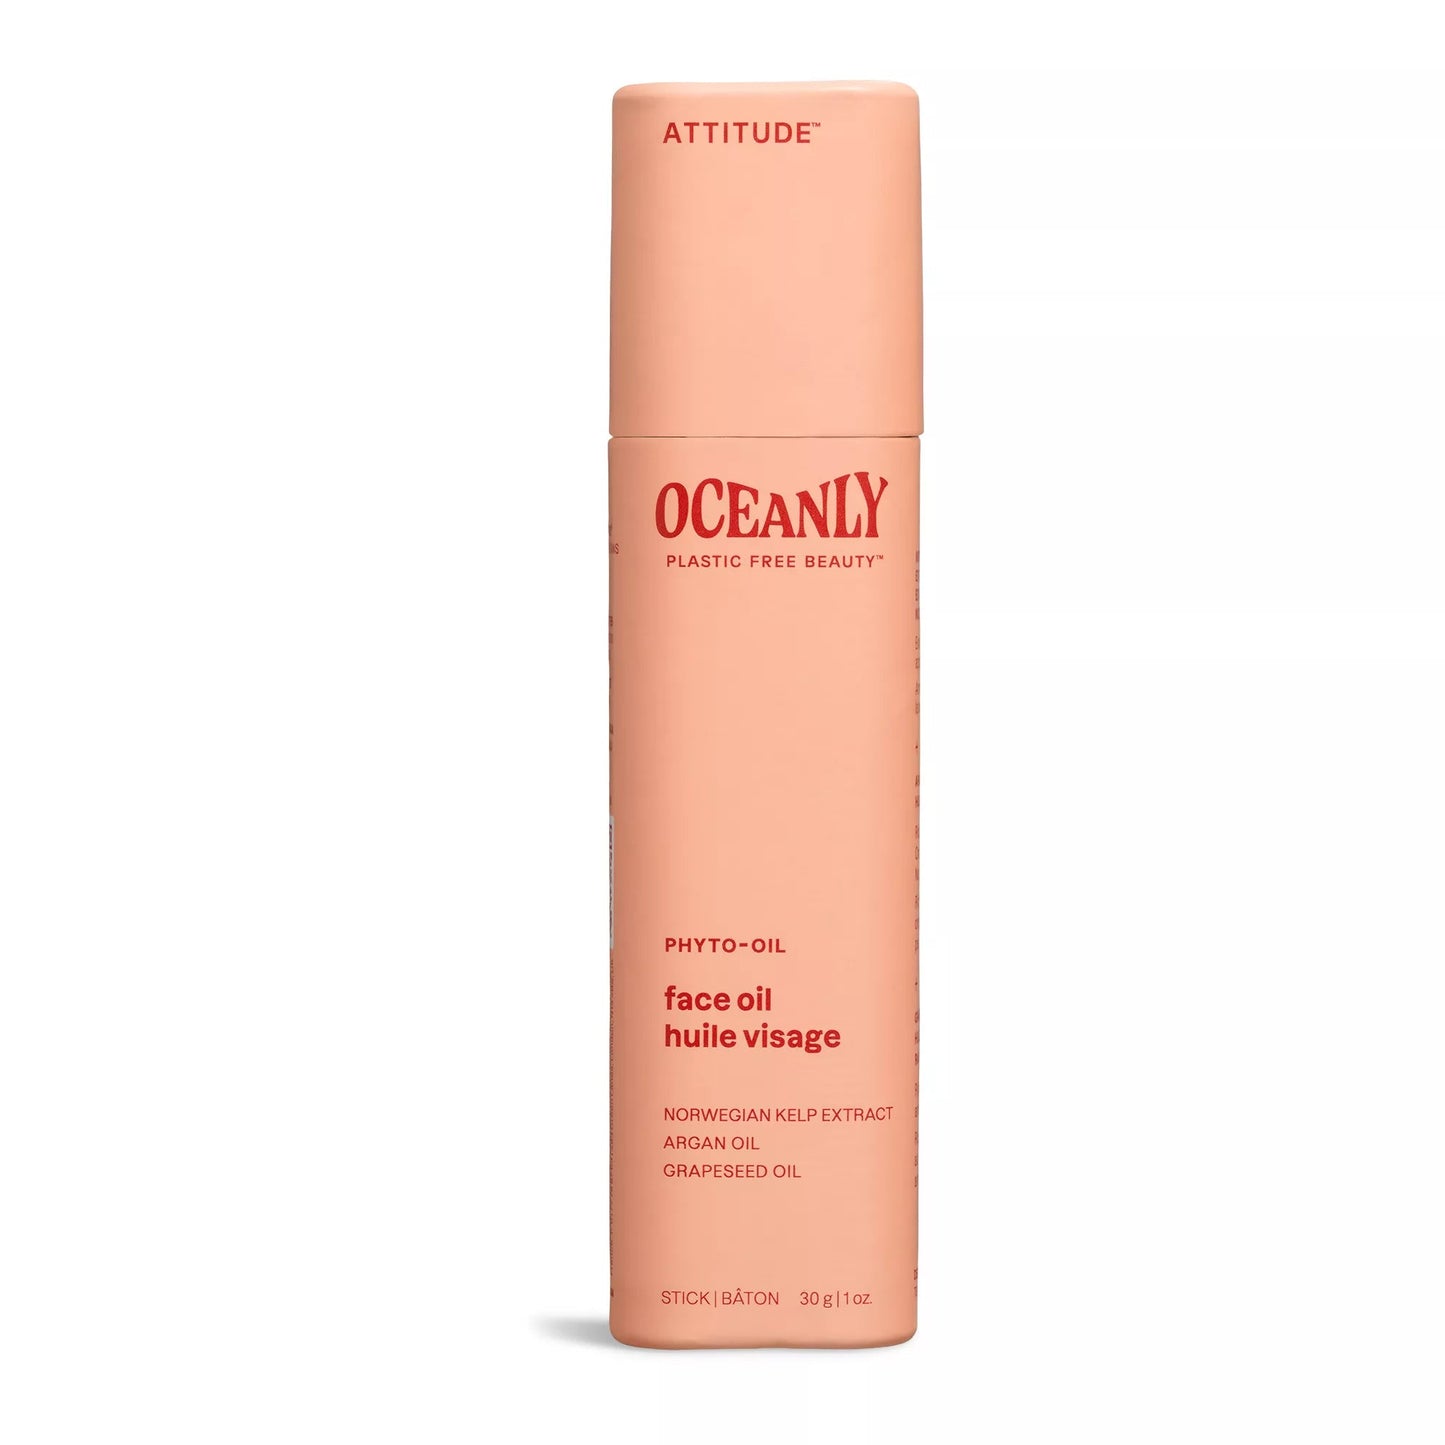 ATTITUDE Oceanly Phyto-Oil Face Oil Unscented 30g 16062_en? 30g Unscented